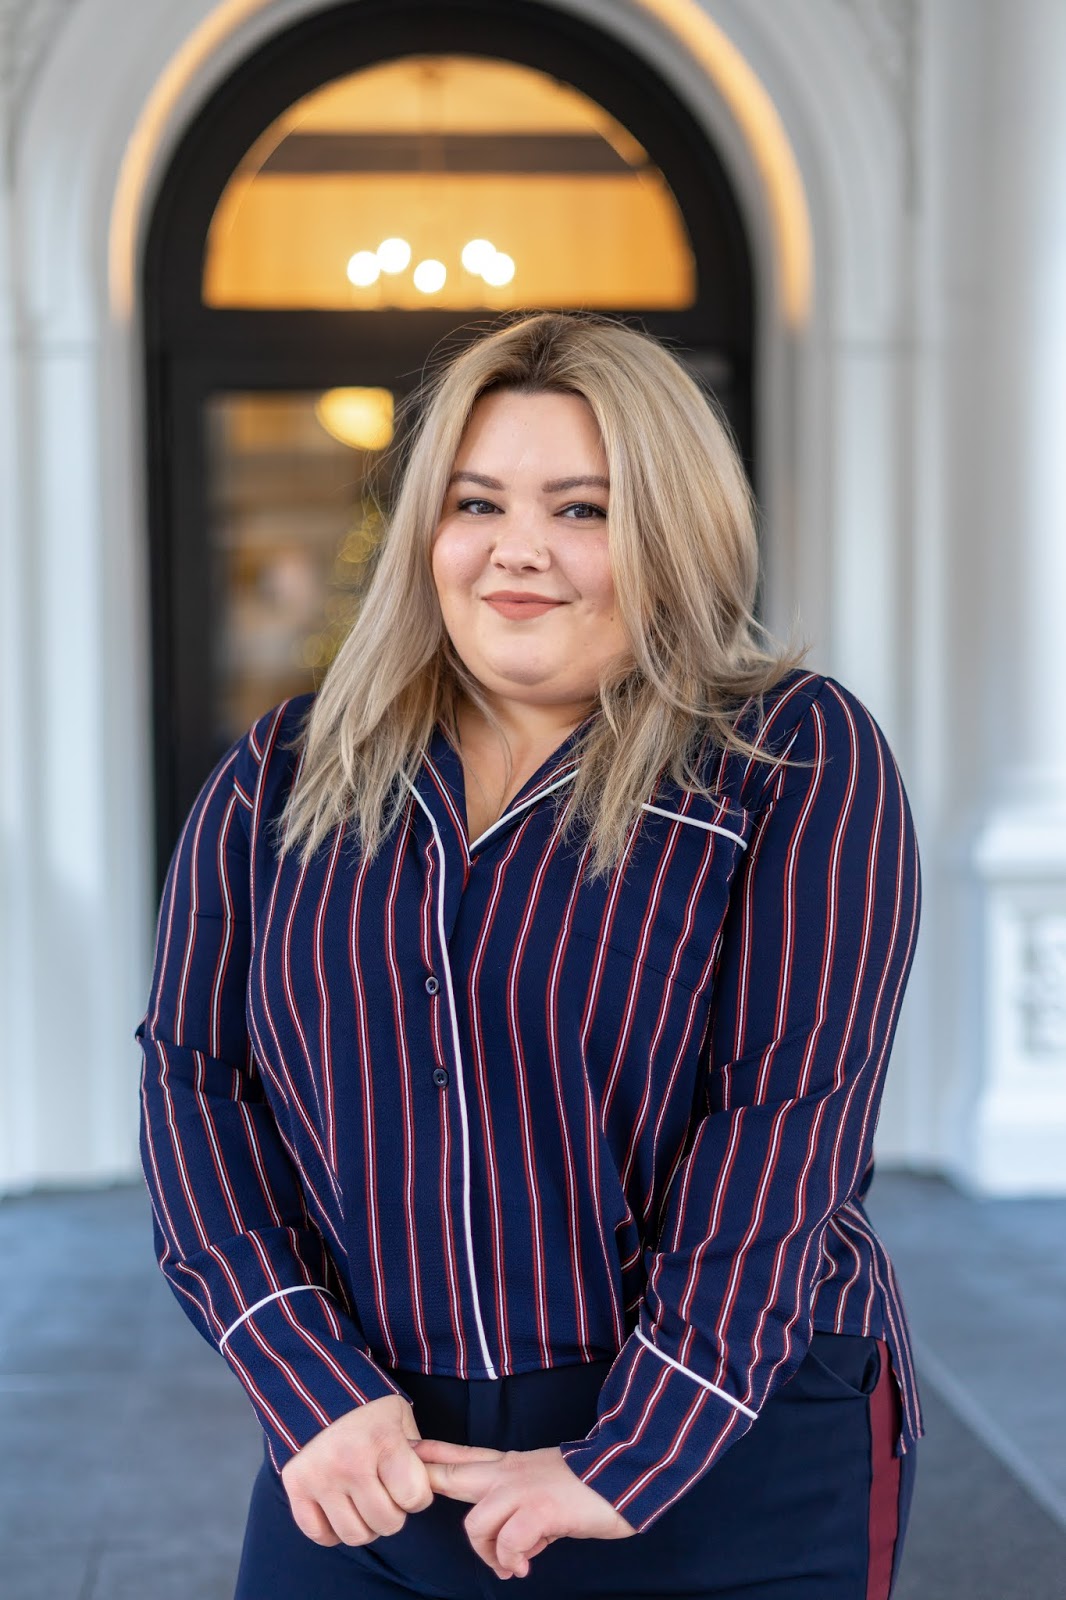 Chicago Plus Size Petite Fashion Blogger and model Natalie Craig reviews Soncy's, a new plus size boutique, Suit Up High Waisted Tuxedo Trousers and the Let's Hit Snooze Striped Top.